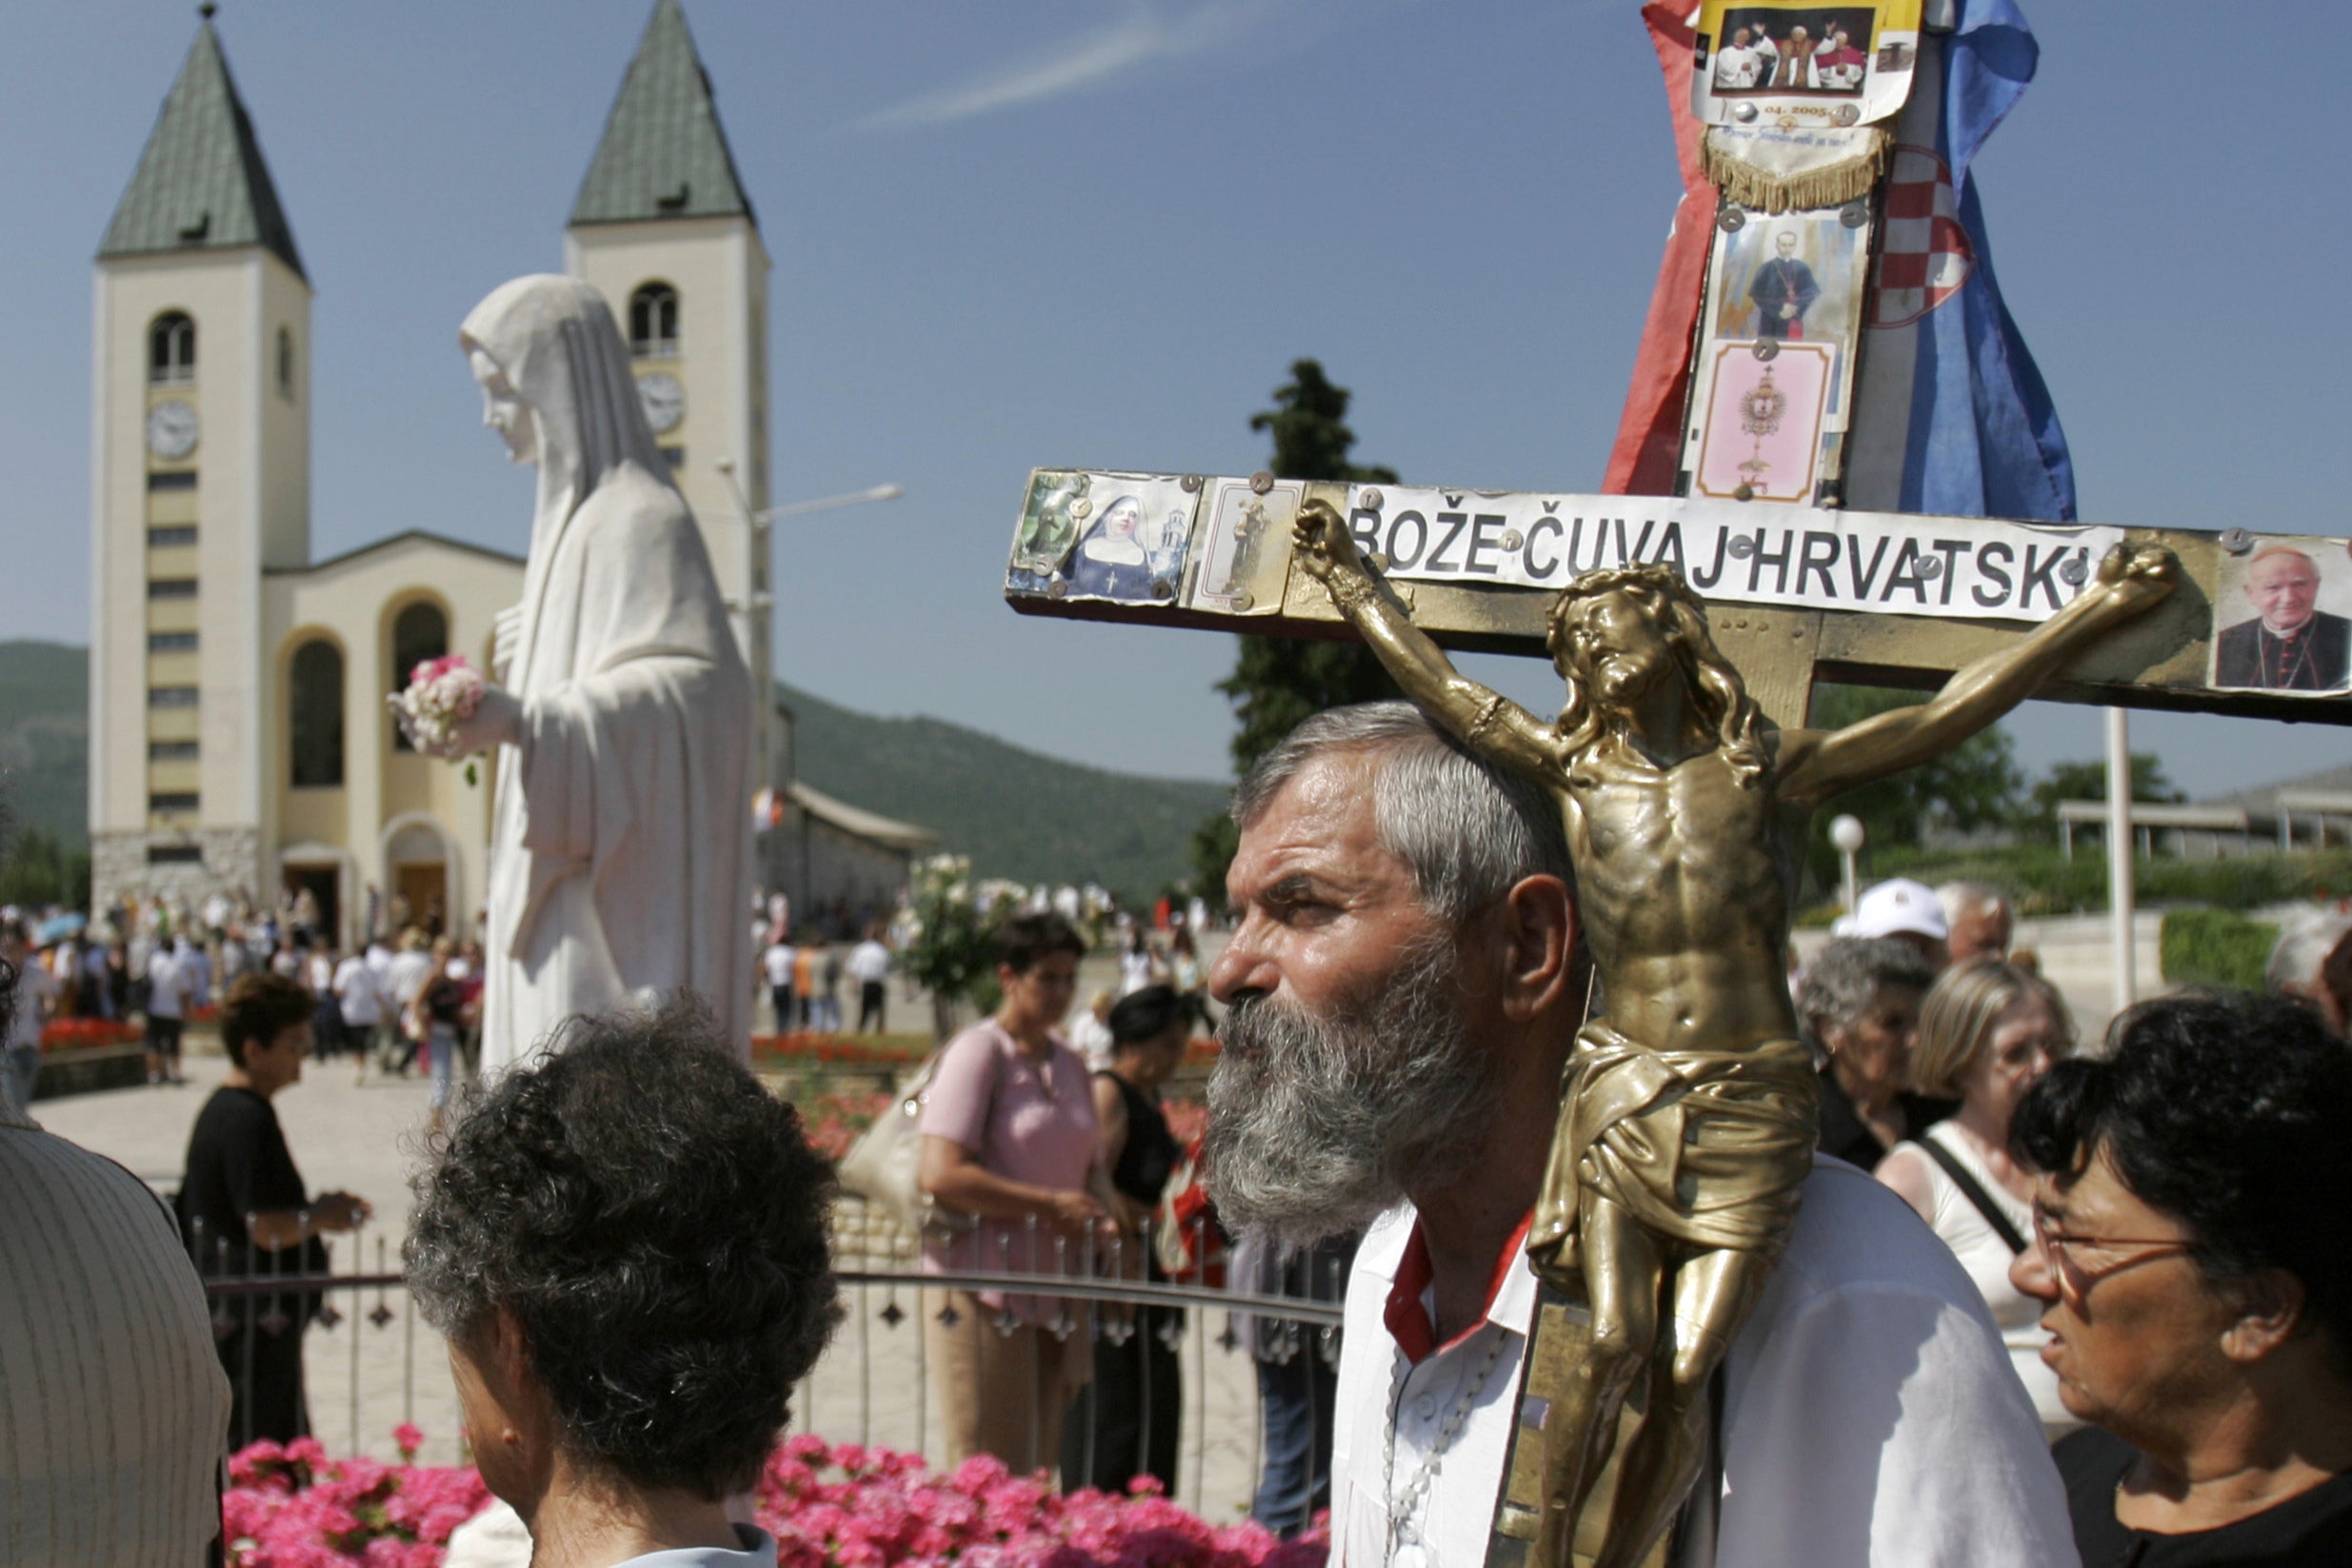 Pilgrims walk around a statue of the Blessed Virgin Mary near the church of St. James in Medjugorje, Bosnia and Herzegovina